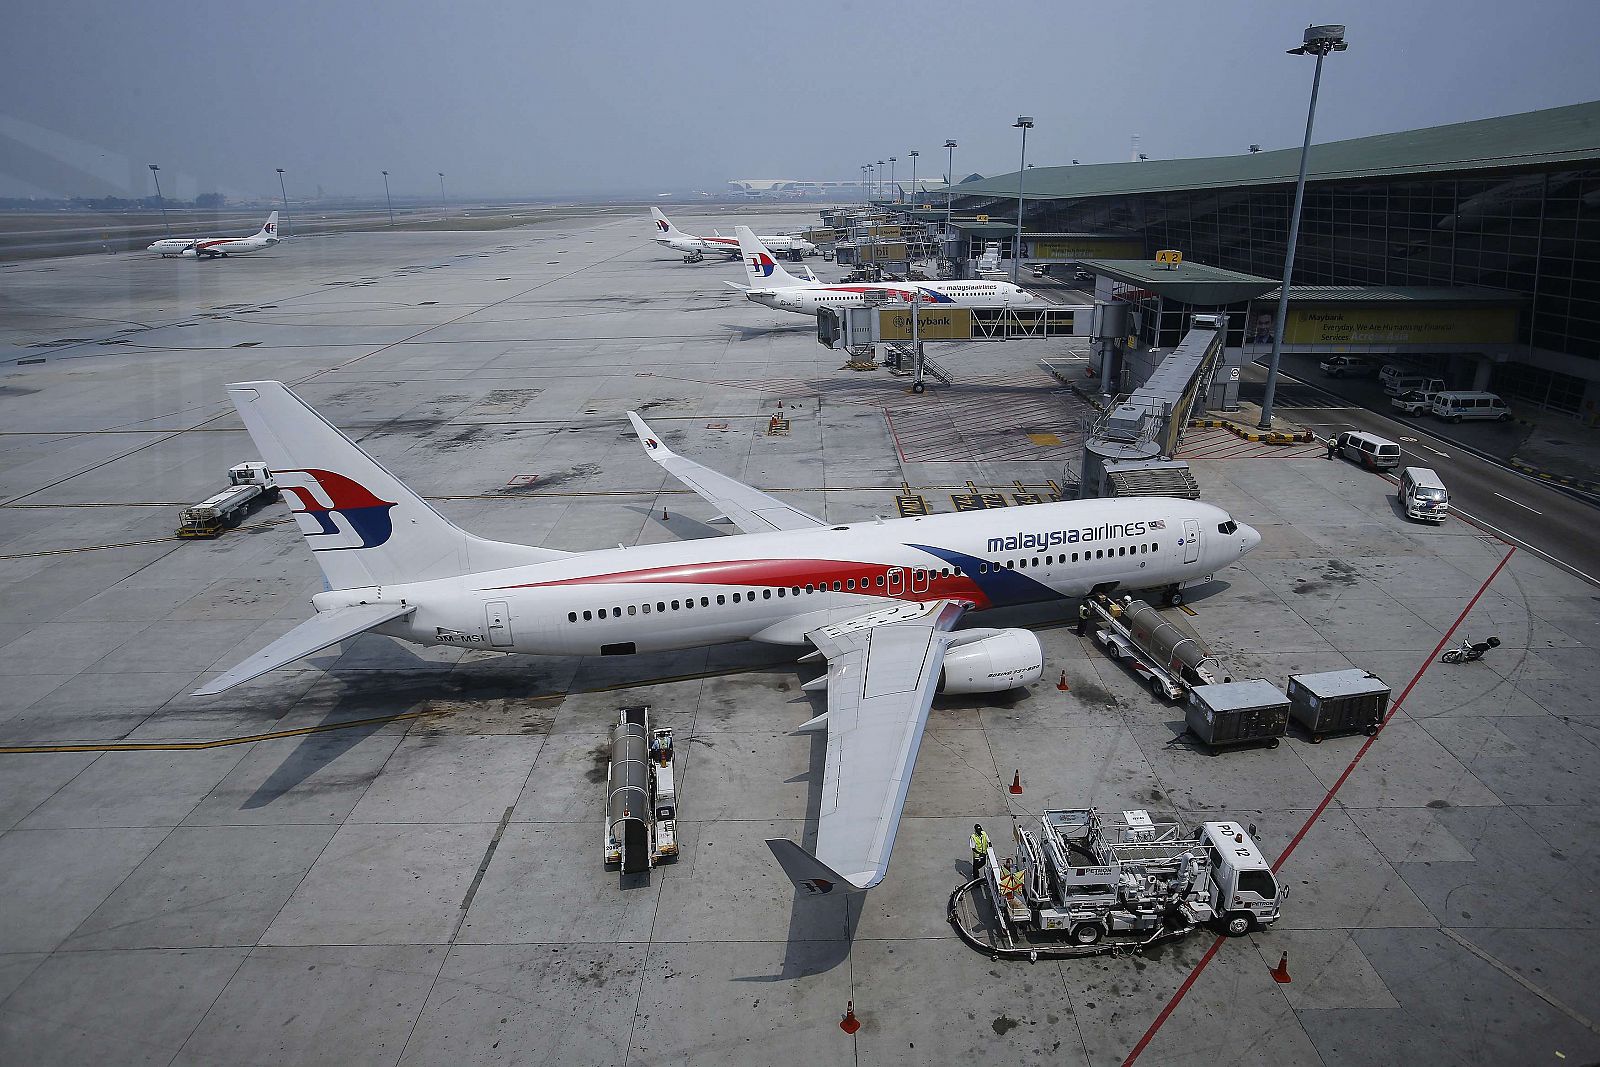 Malaysia Airlines Boeing 737-800 aircraft is seen on the tarmac at Kuala Lumpur International Airport in Sepang